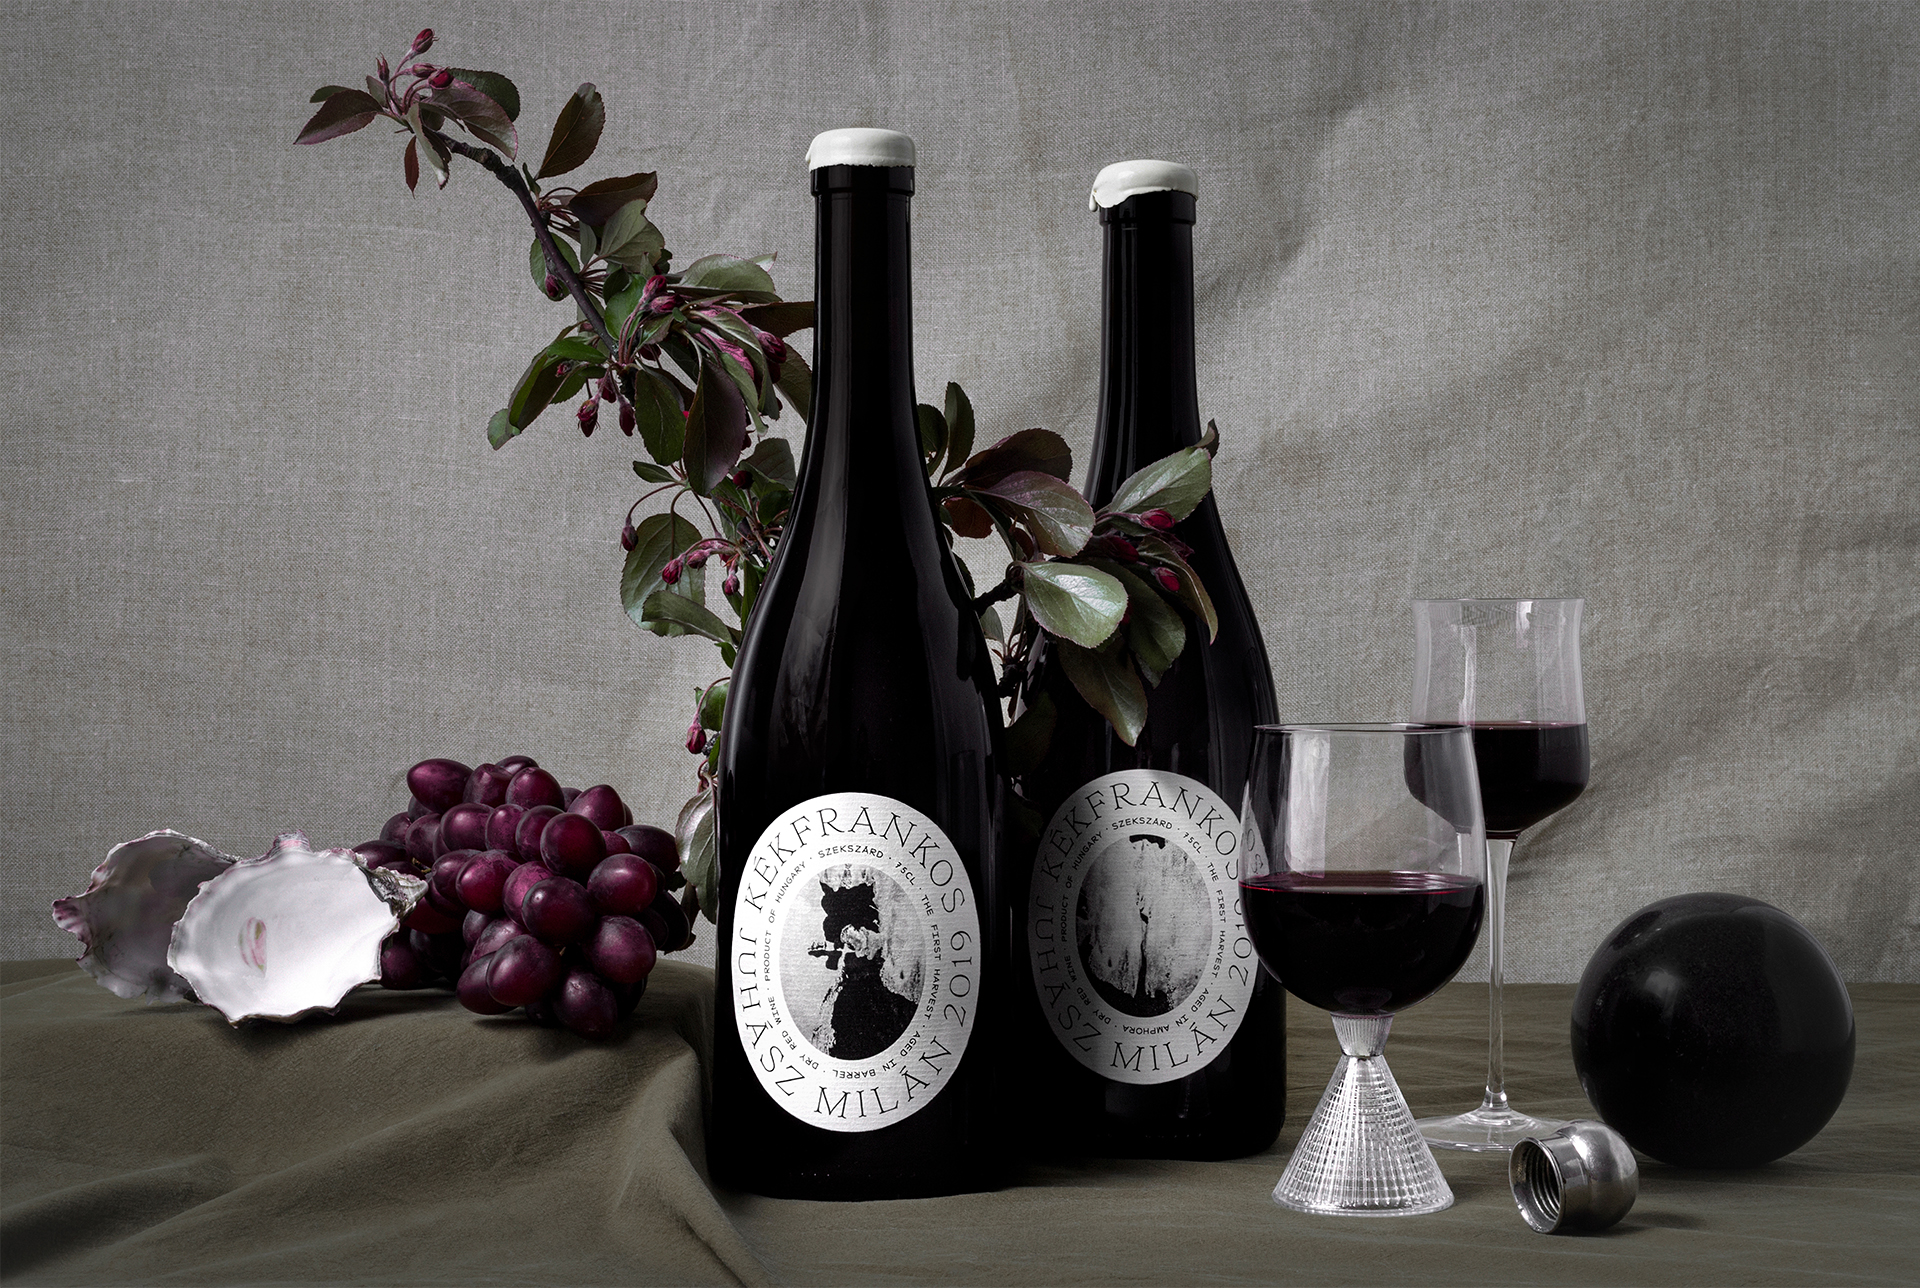 Juhász Milán’s Natural Winery Labels Are Unconventional